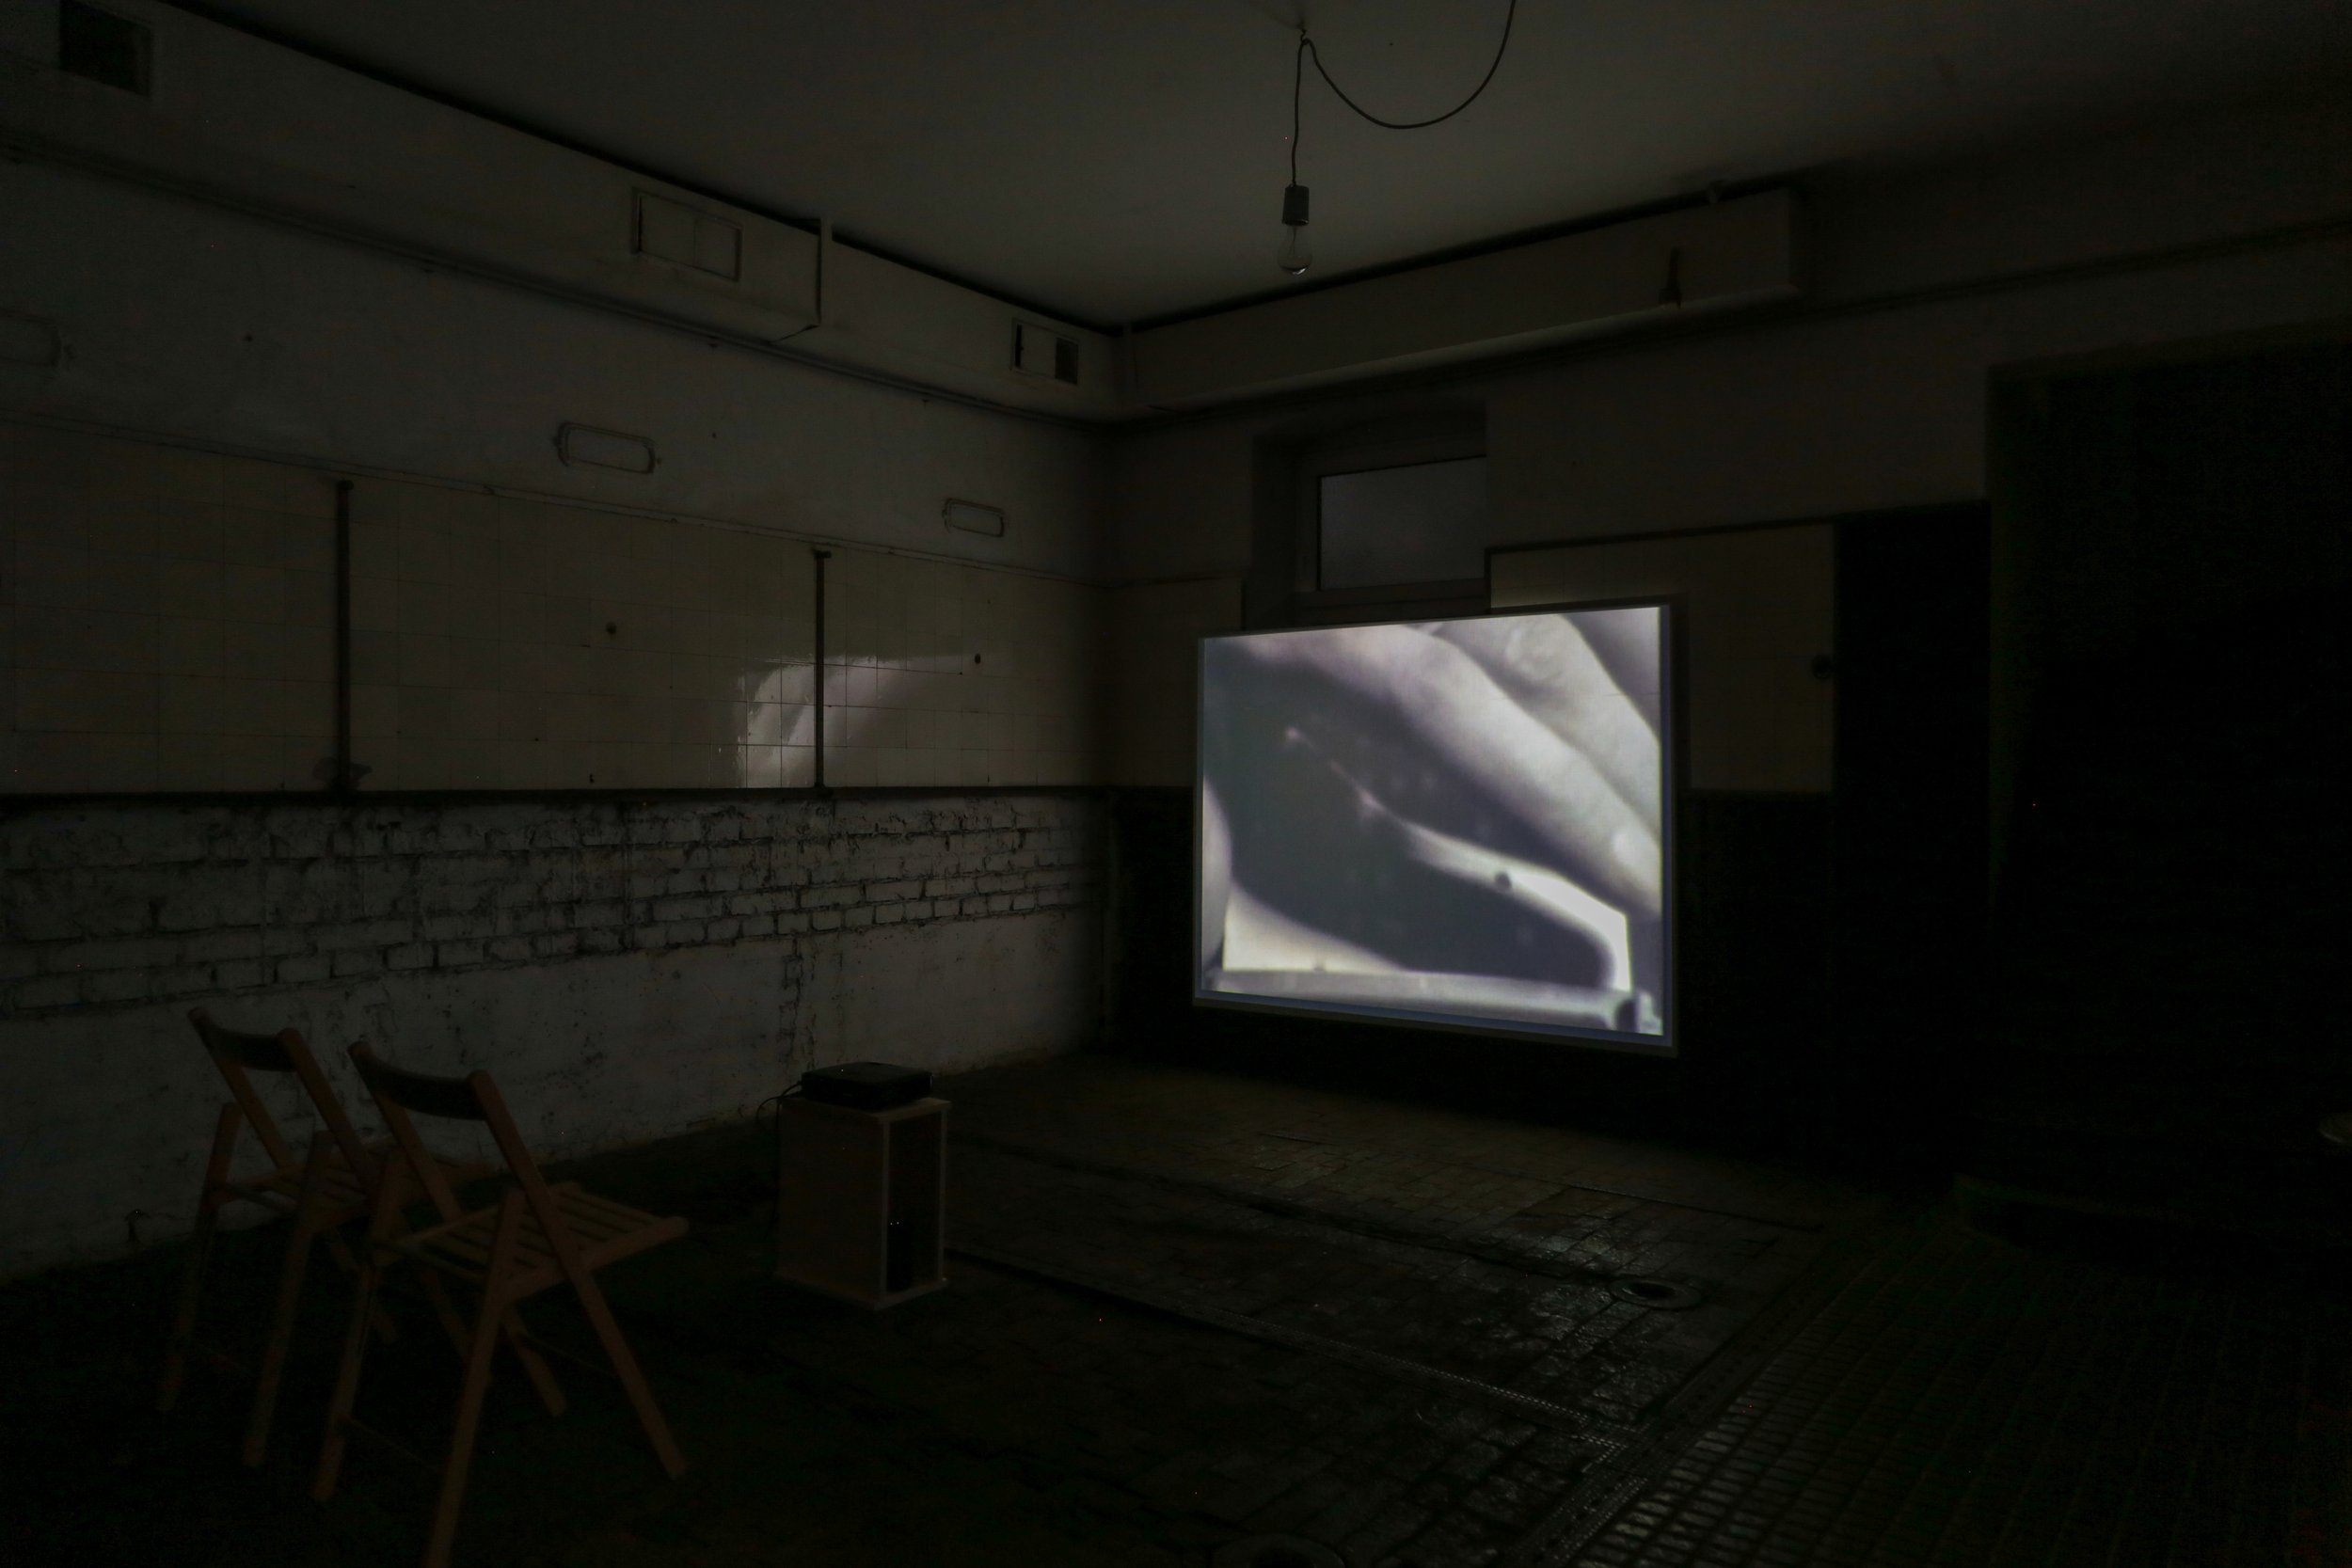   fig28 installation view Joan Jonas, Performance, 1979, 00:11:43., In collections: De Appel, LIMA  